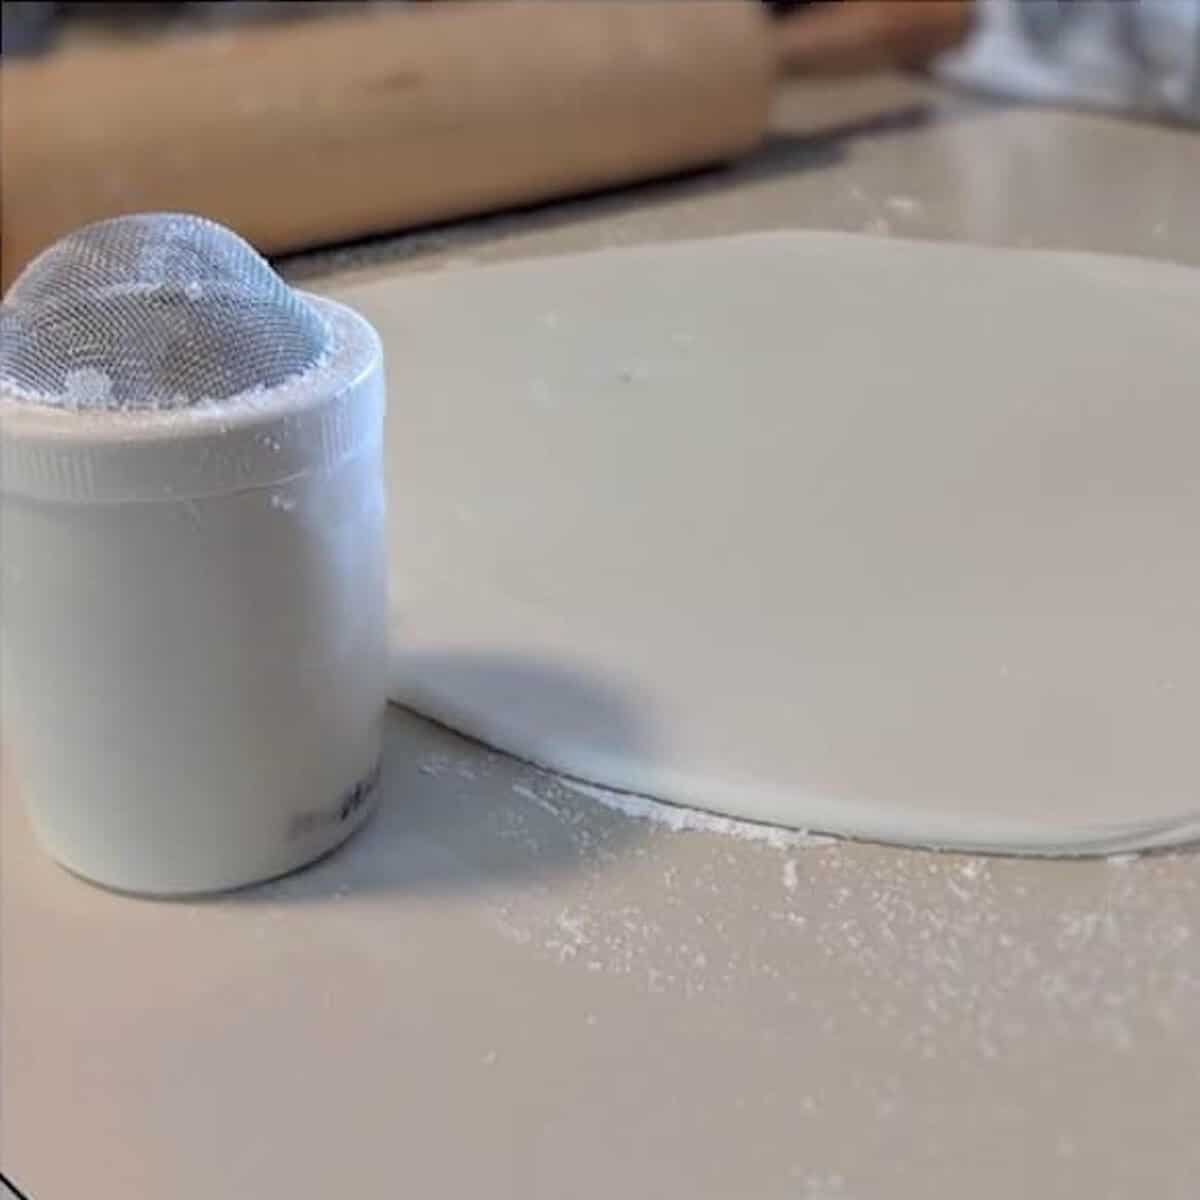 Marshmallow fondant rolled out next to a powdered sugar shaker.